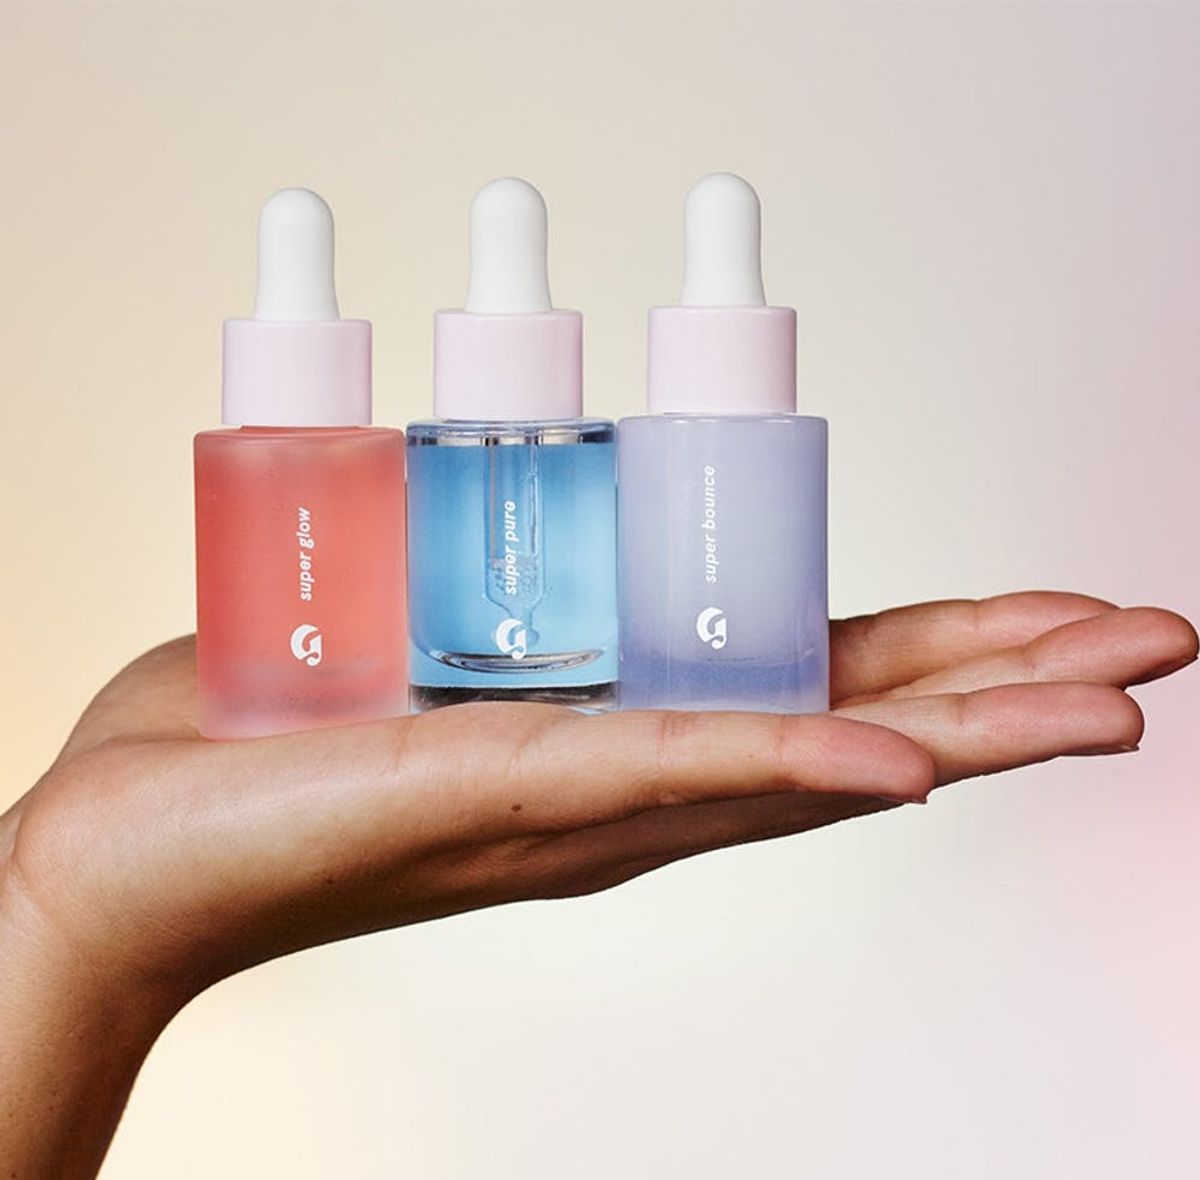 Cult Beauty Brand Glossier Just Dropped a Super-French Skincare Line